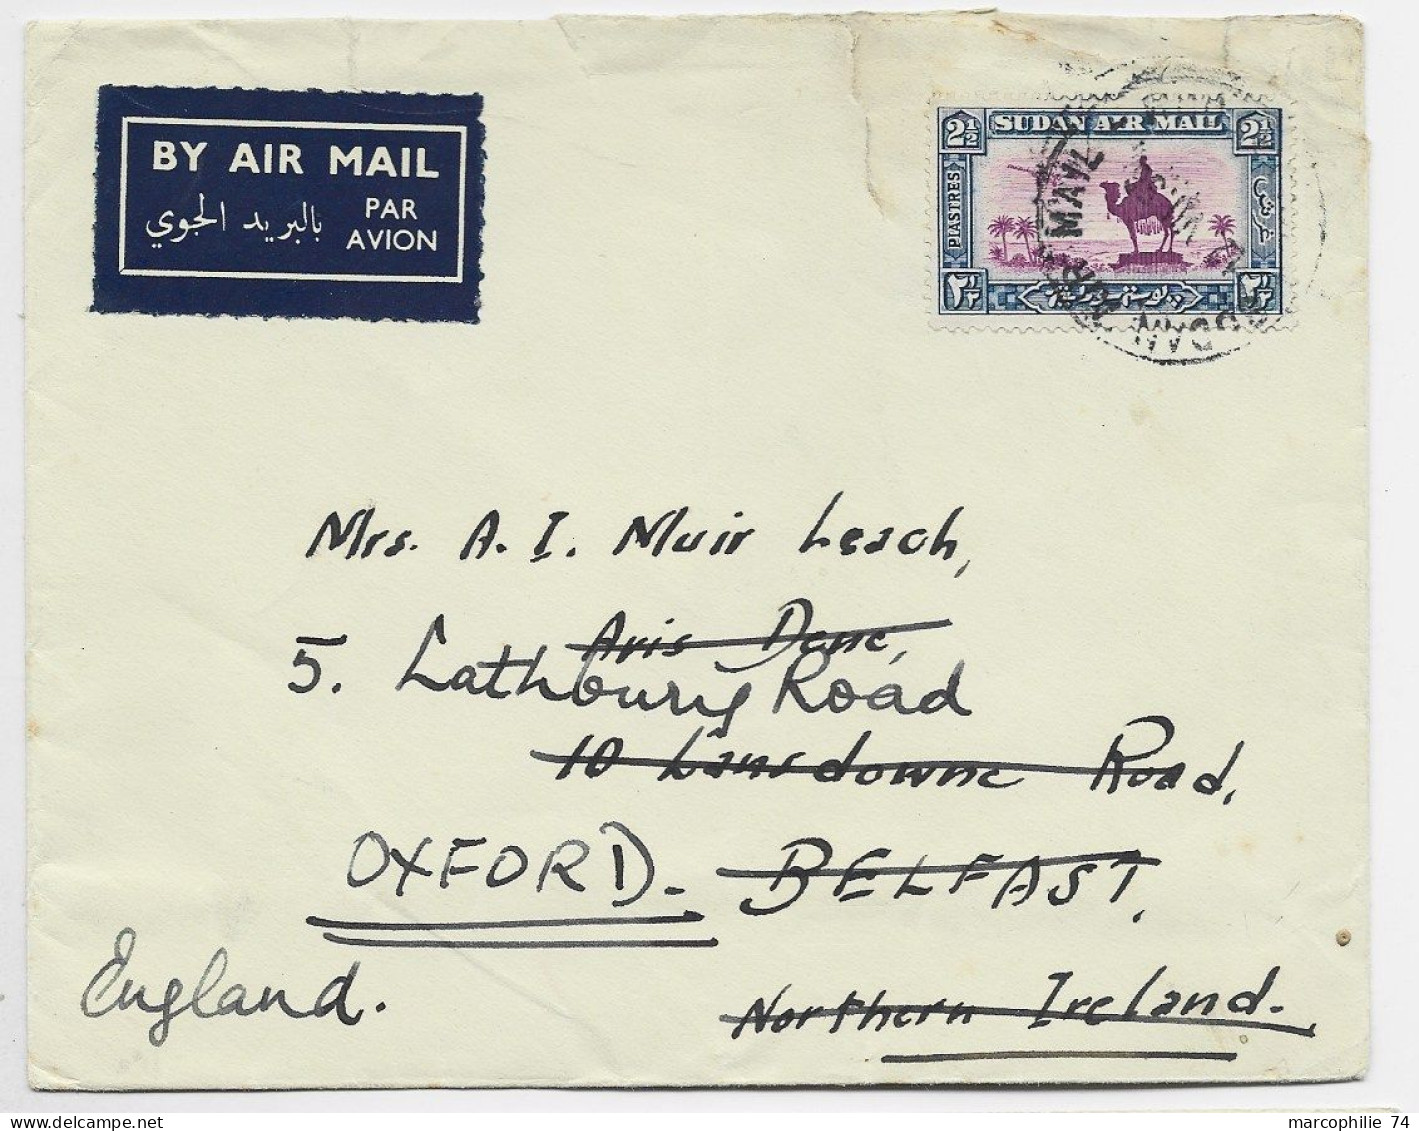 SUDAN AIR MAIL 2 1/2 SOLO LETTRE COVER AIR MAIL 1936  TO IRLAND REEX ENGLAND - Soudan (...-1951)